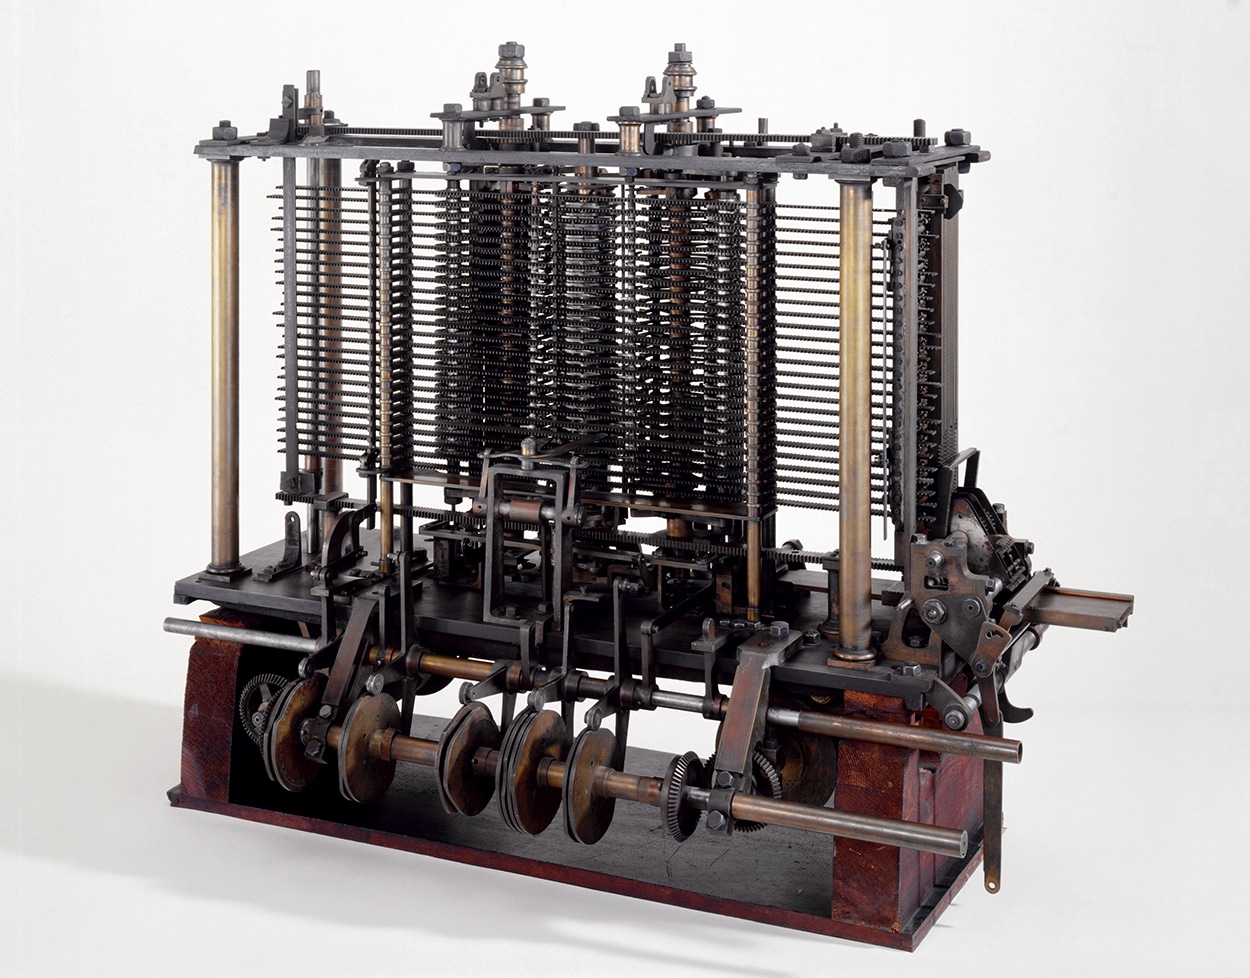 Lovelace's notes identified The Analytical Engine as the world's first general purpose computer. 